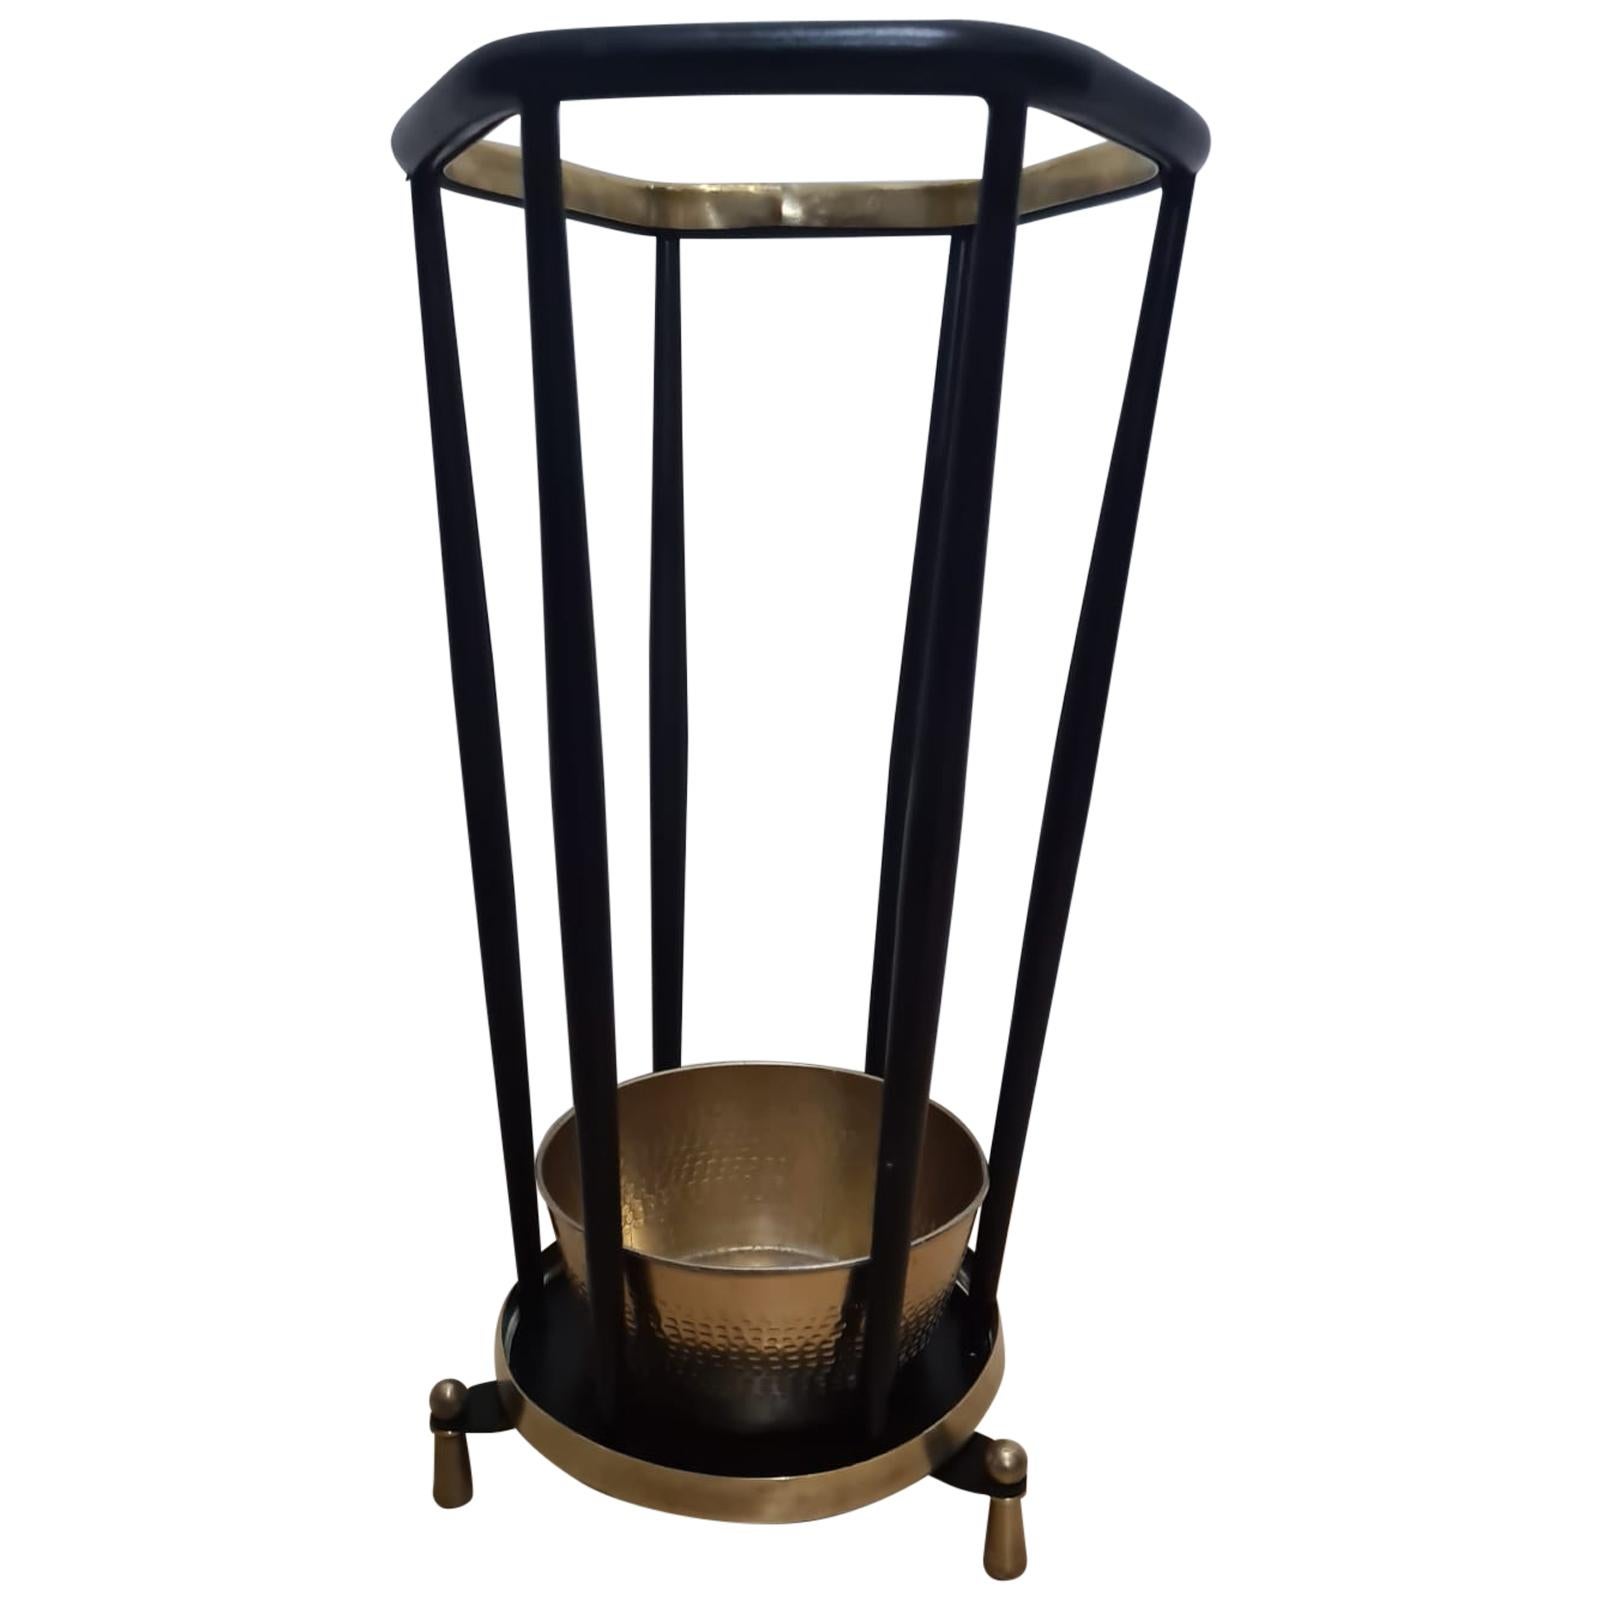 Italian Iron and Brass Umbrella Stand from the 1960s For Sale